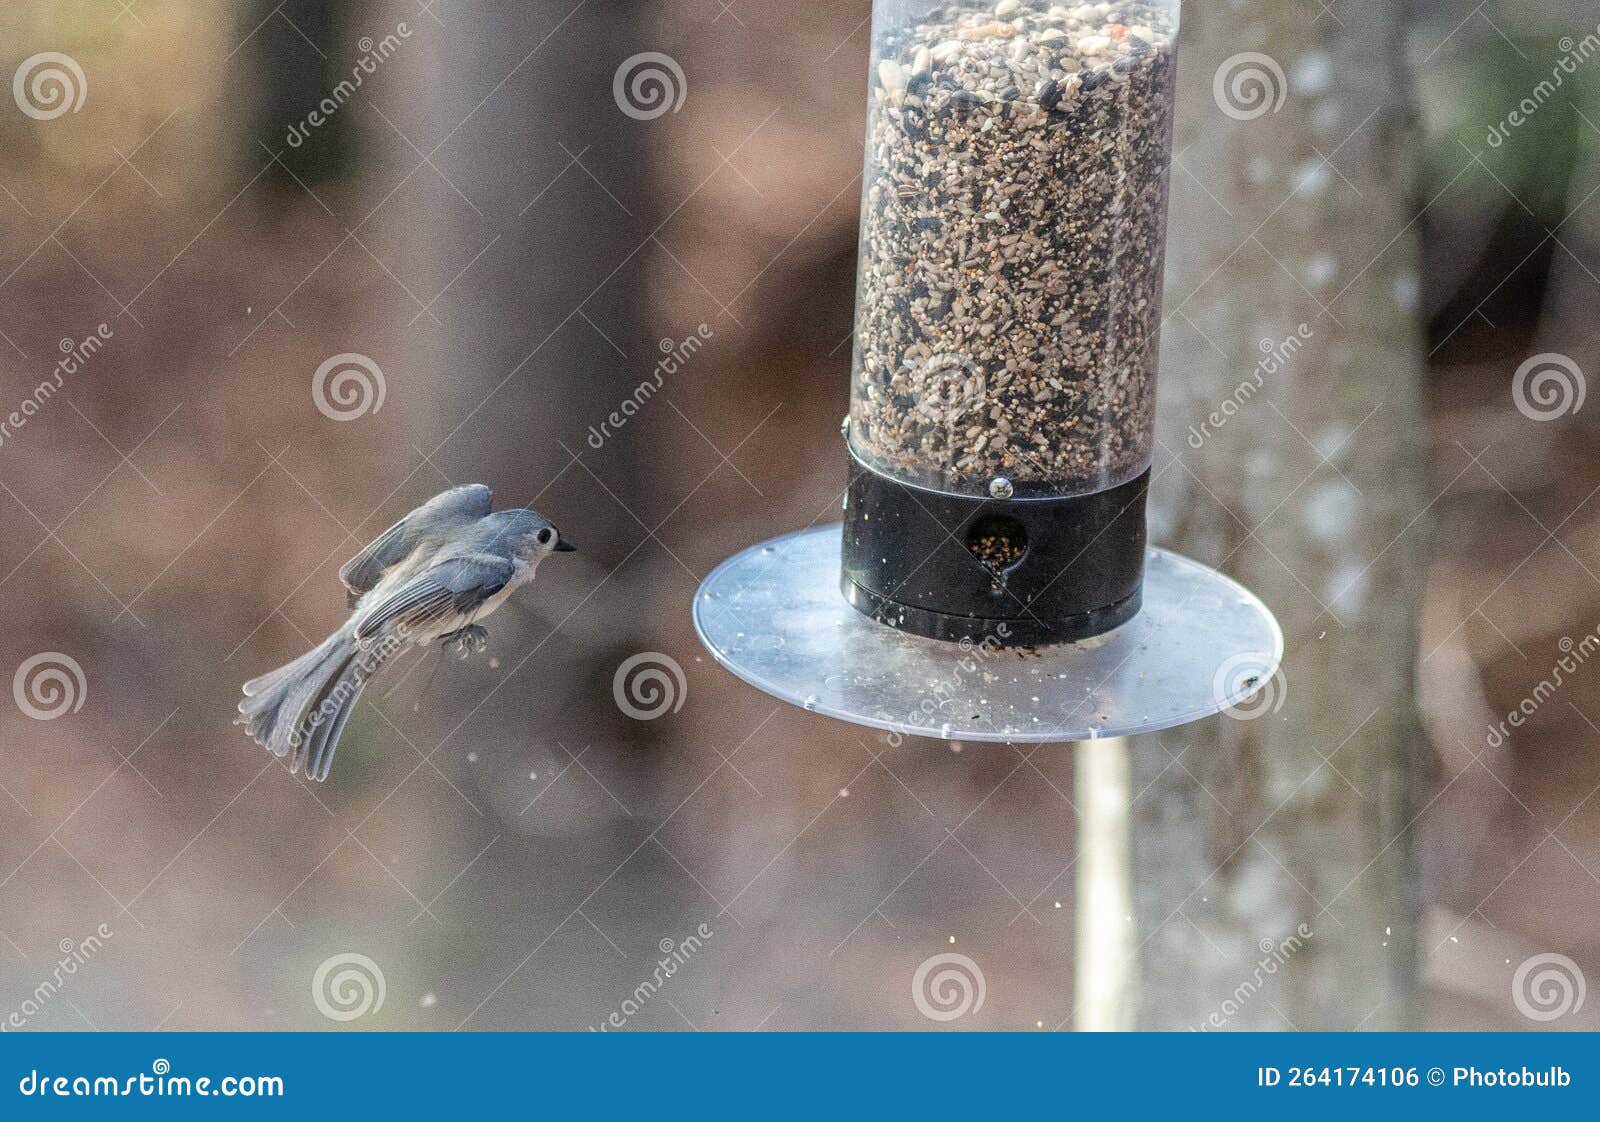 white-breasted nuthatch in midflight about to land on a feeder